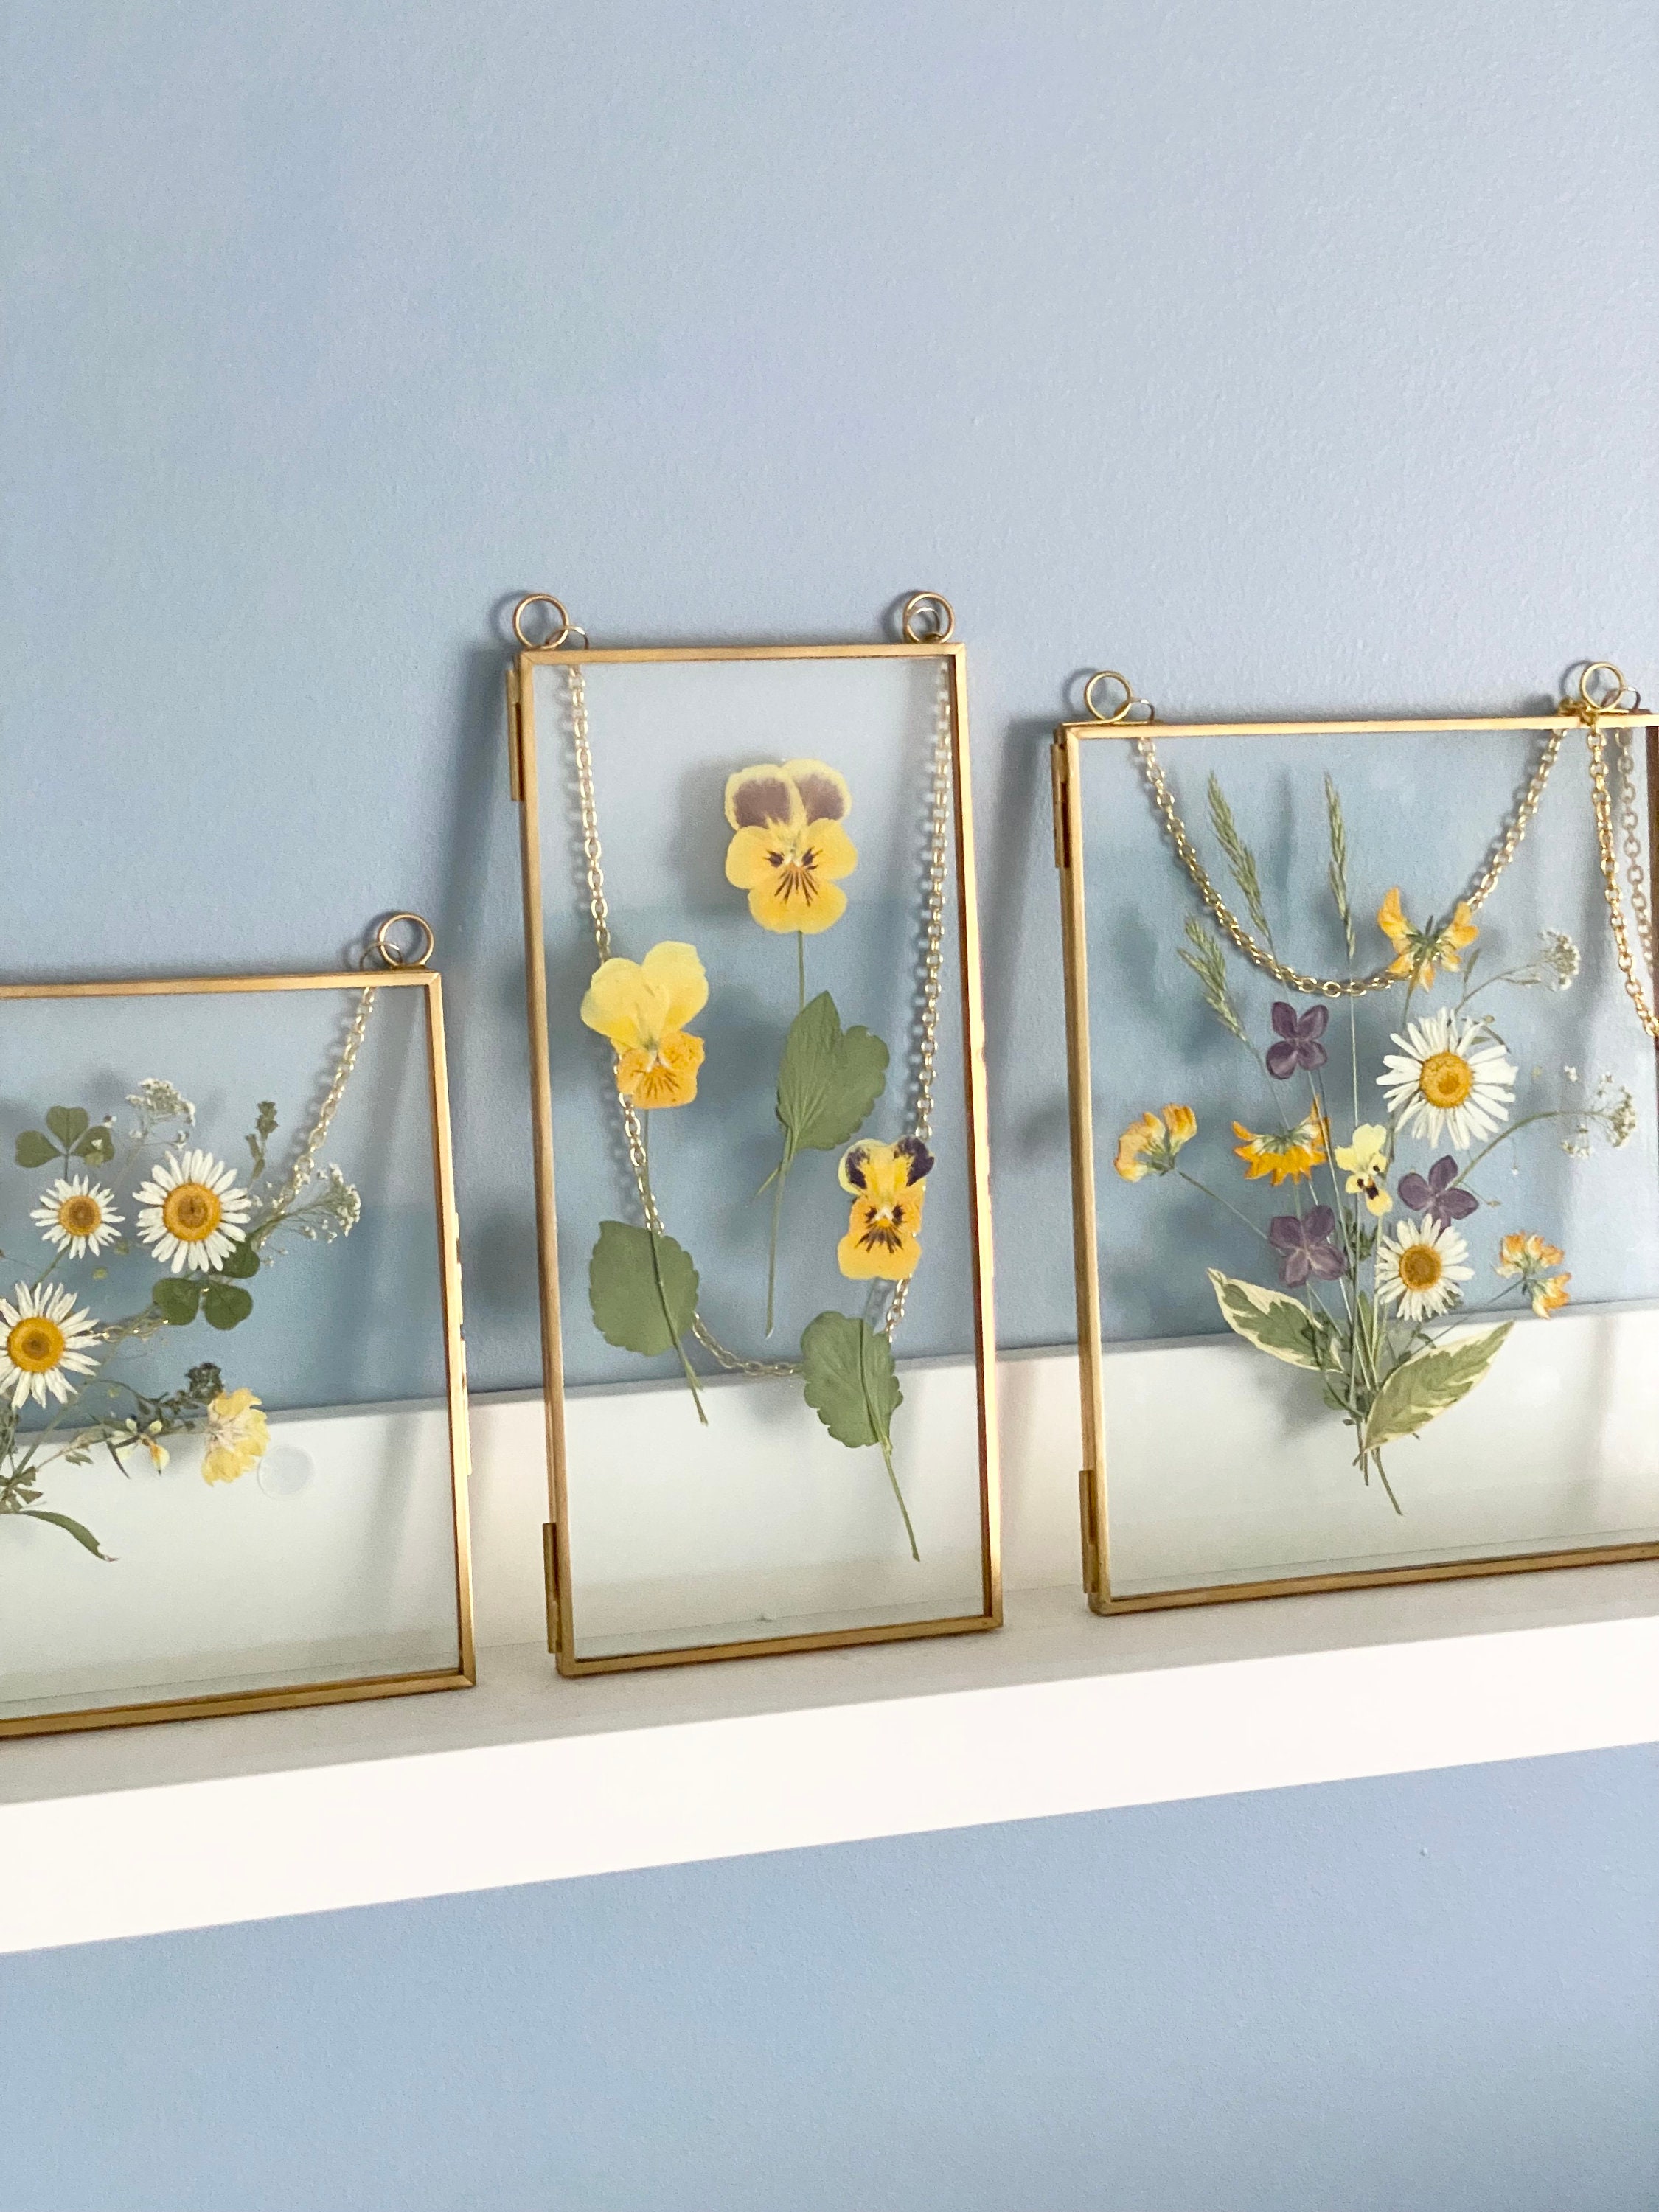 Beedecor Double Glass Frame for Pressed Flowers, Polaroid Photo and Artwork,Hanging Pressed Flower Frames,Wall Decor Clear Floating Frame Display